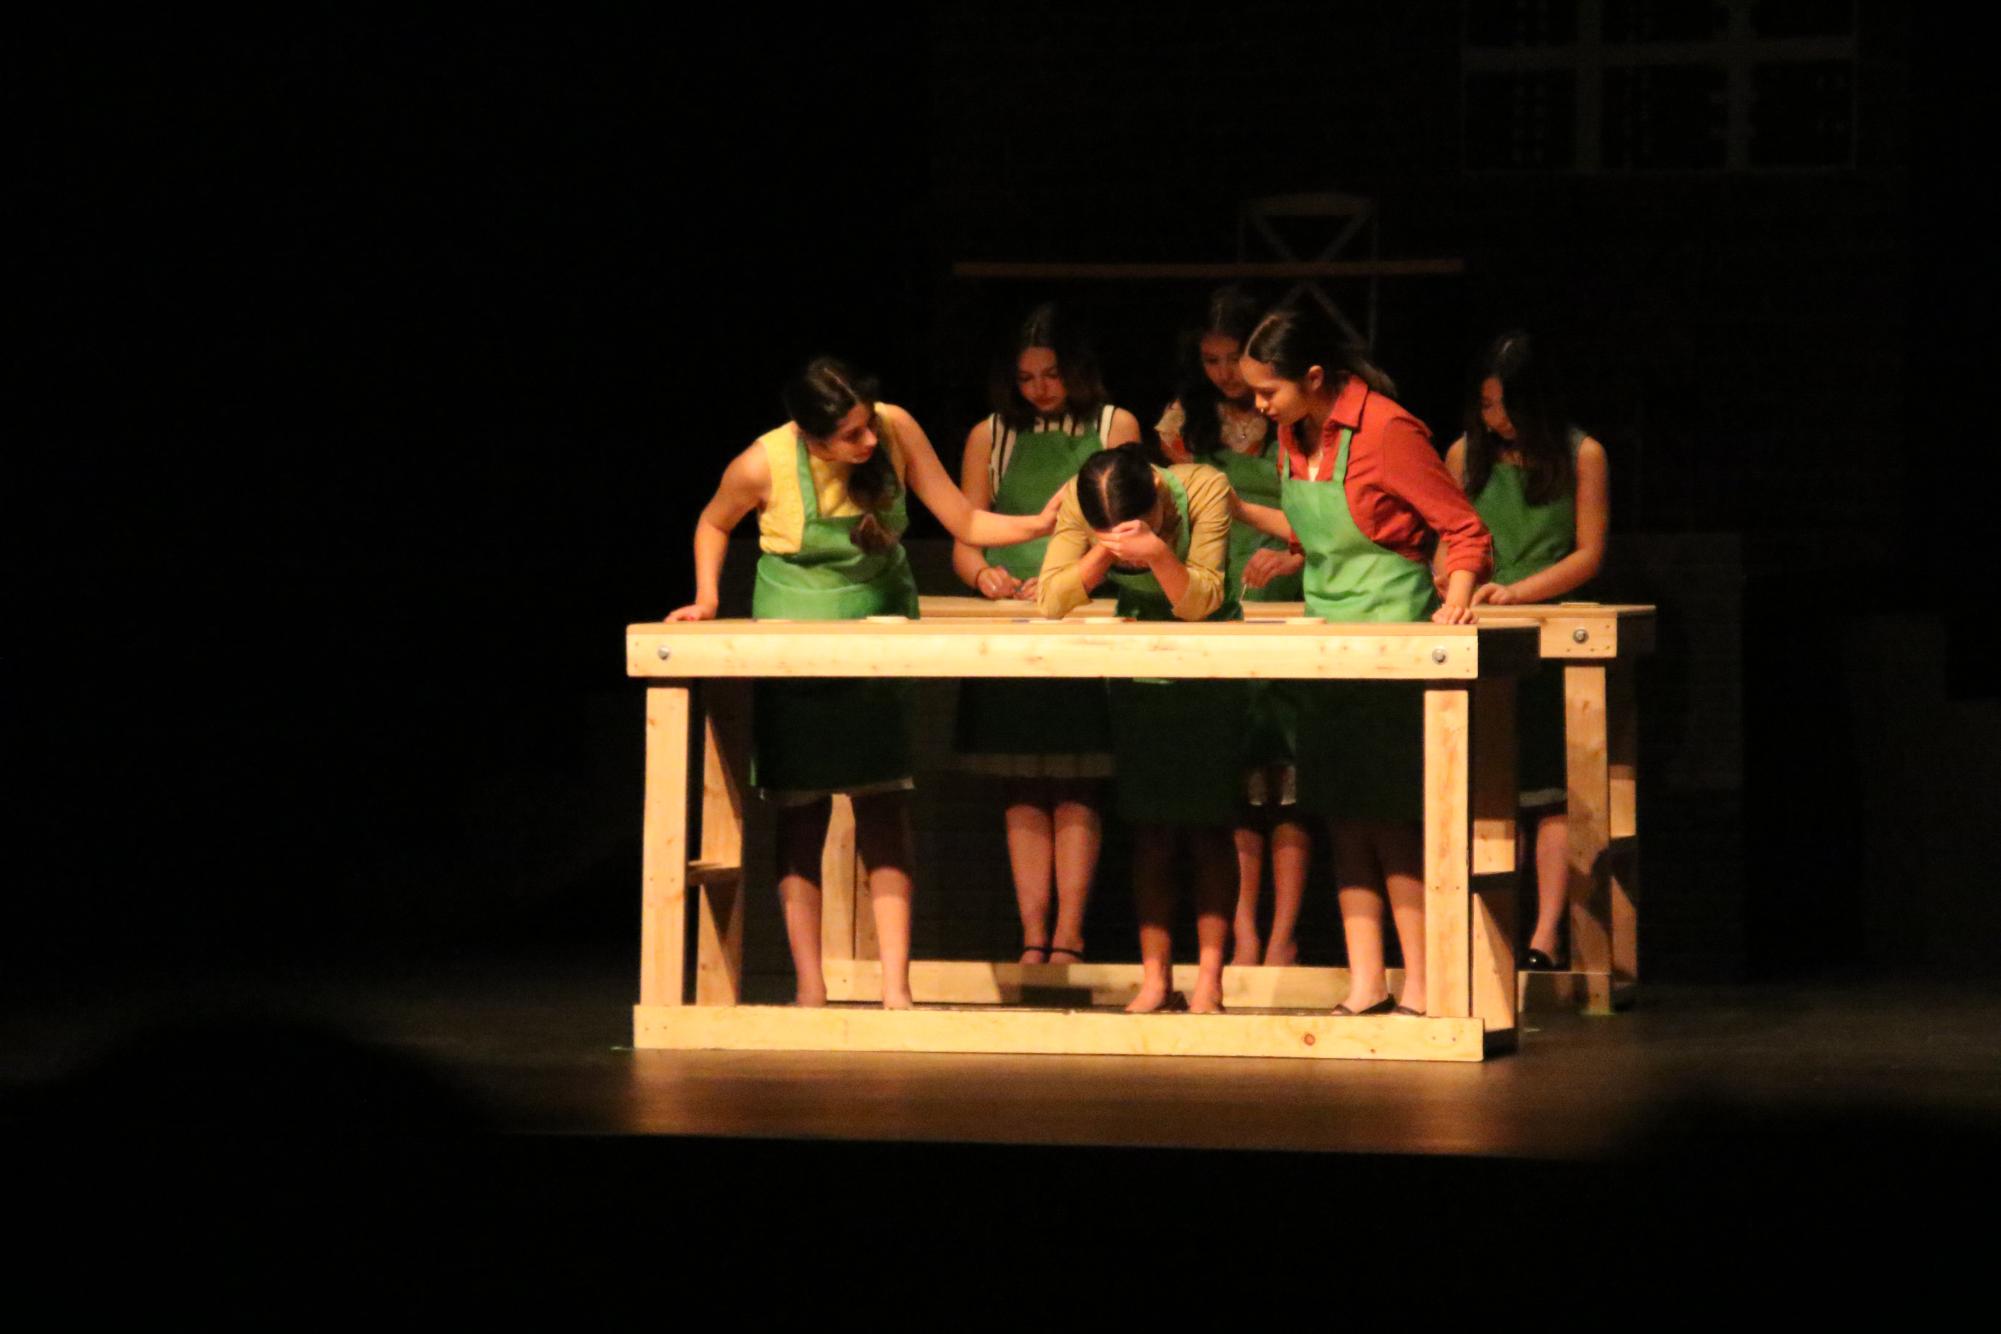 DVHS+Drama+brings+intrigue+and+emotion+with+%E2%80%9CRadium+Girls%E2%80%9D